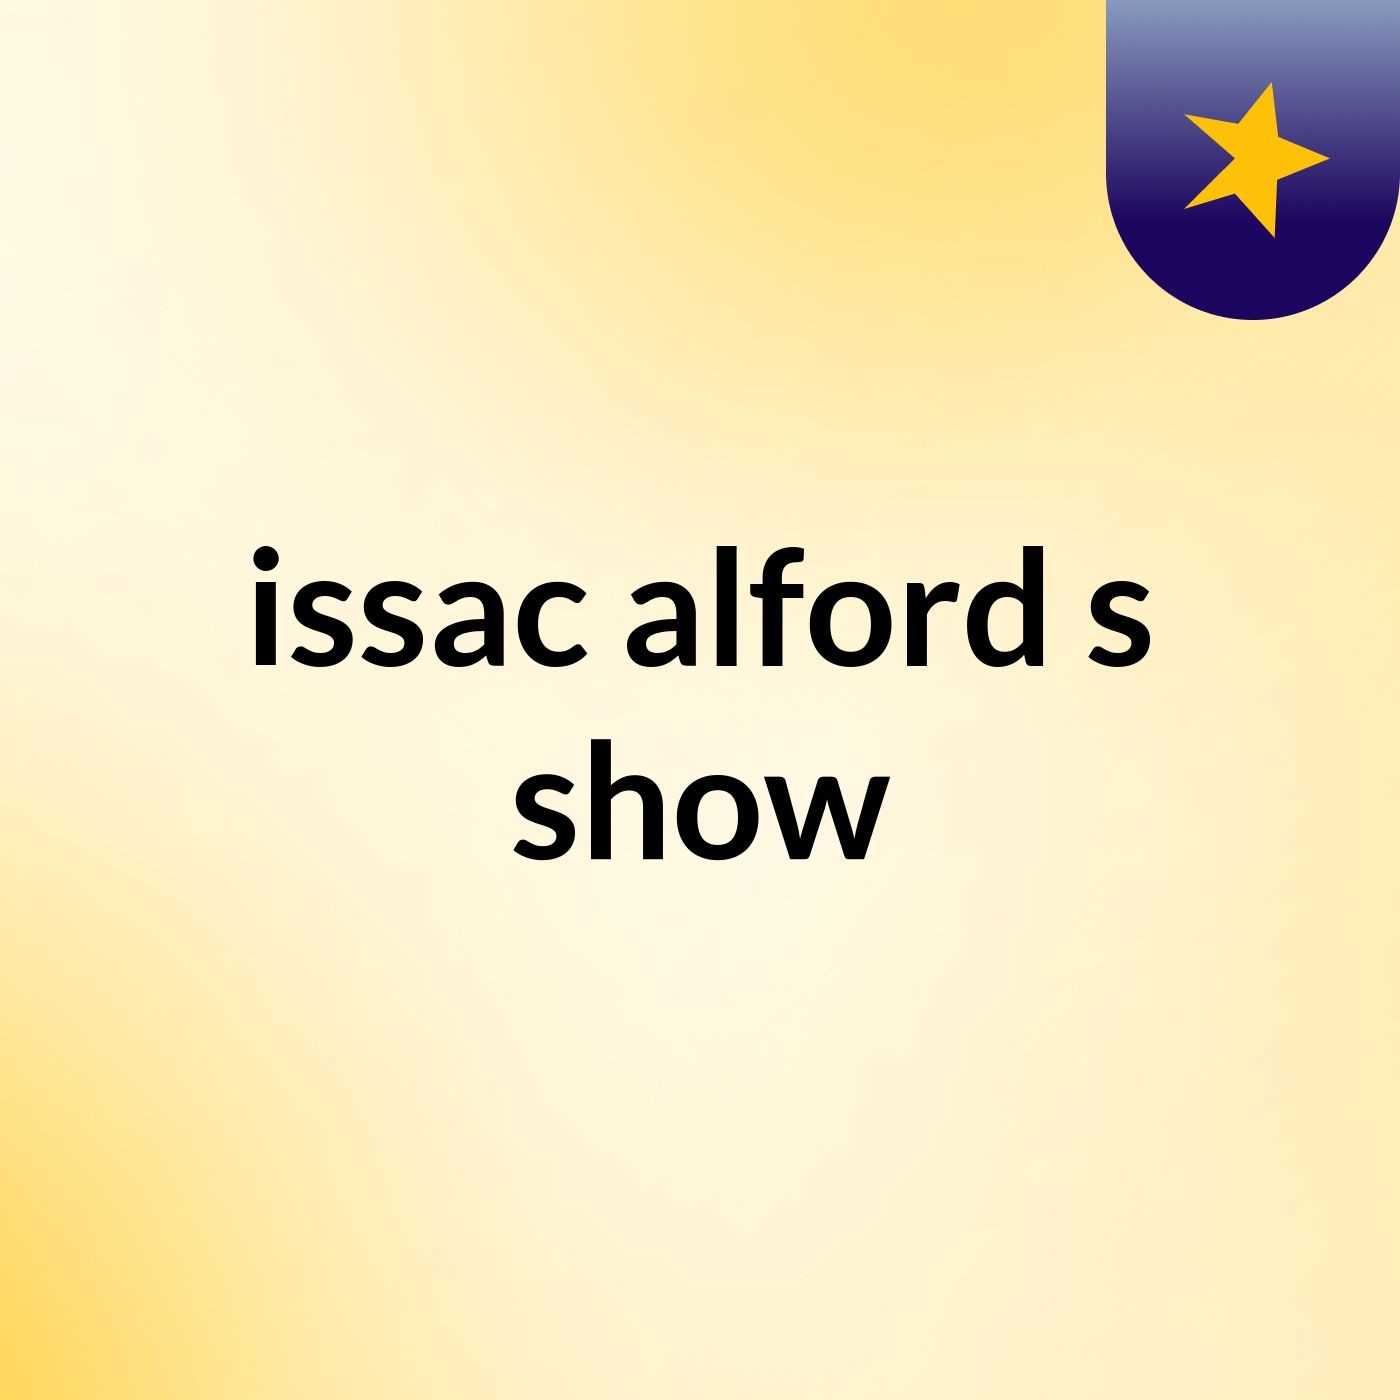 issac alford's show